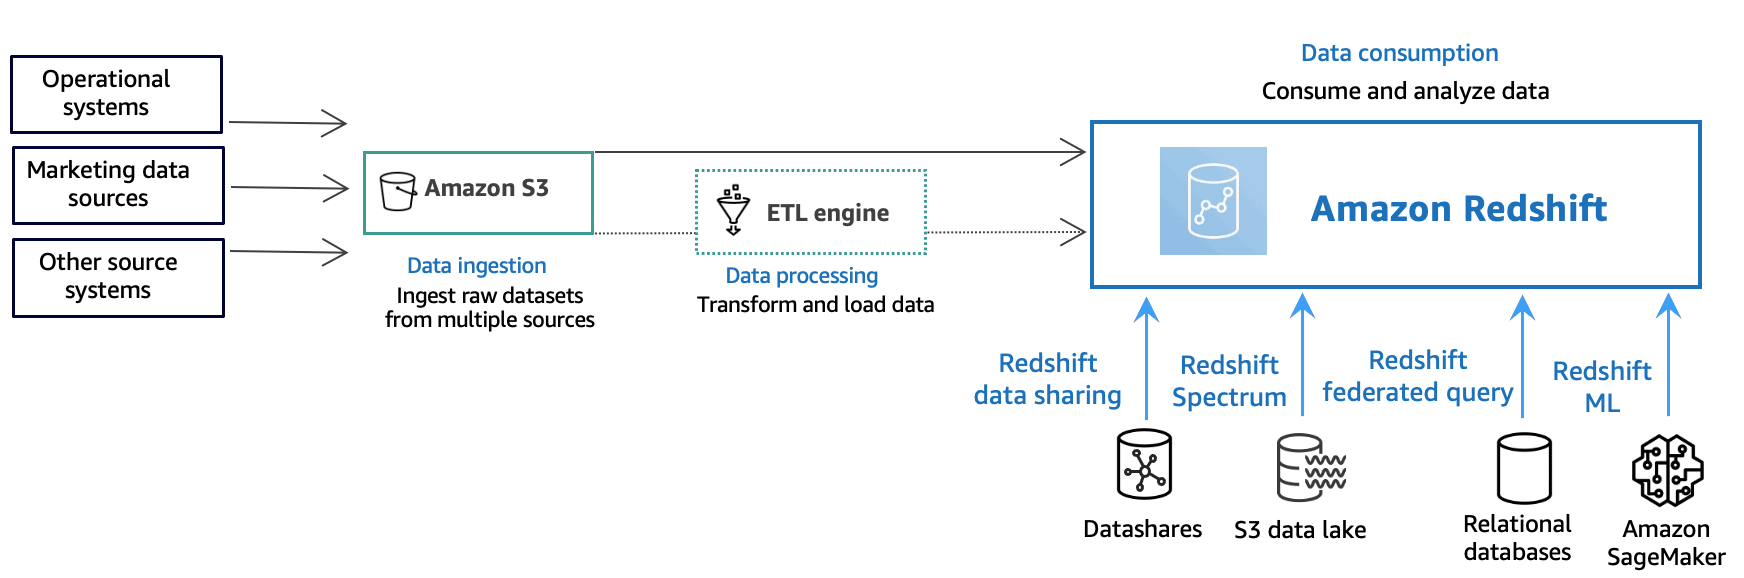 Amazon Redshift Processing Flow